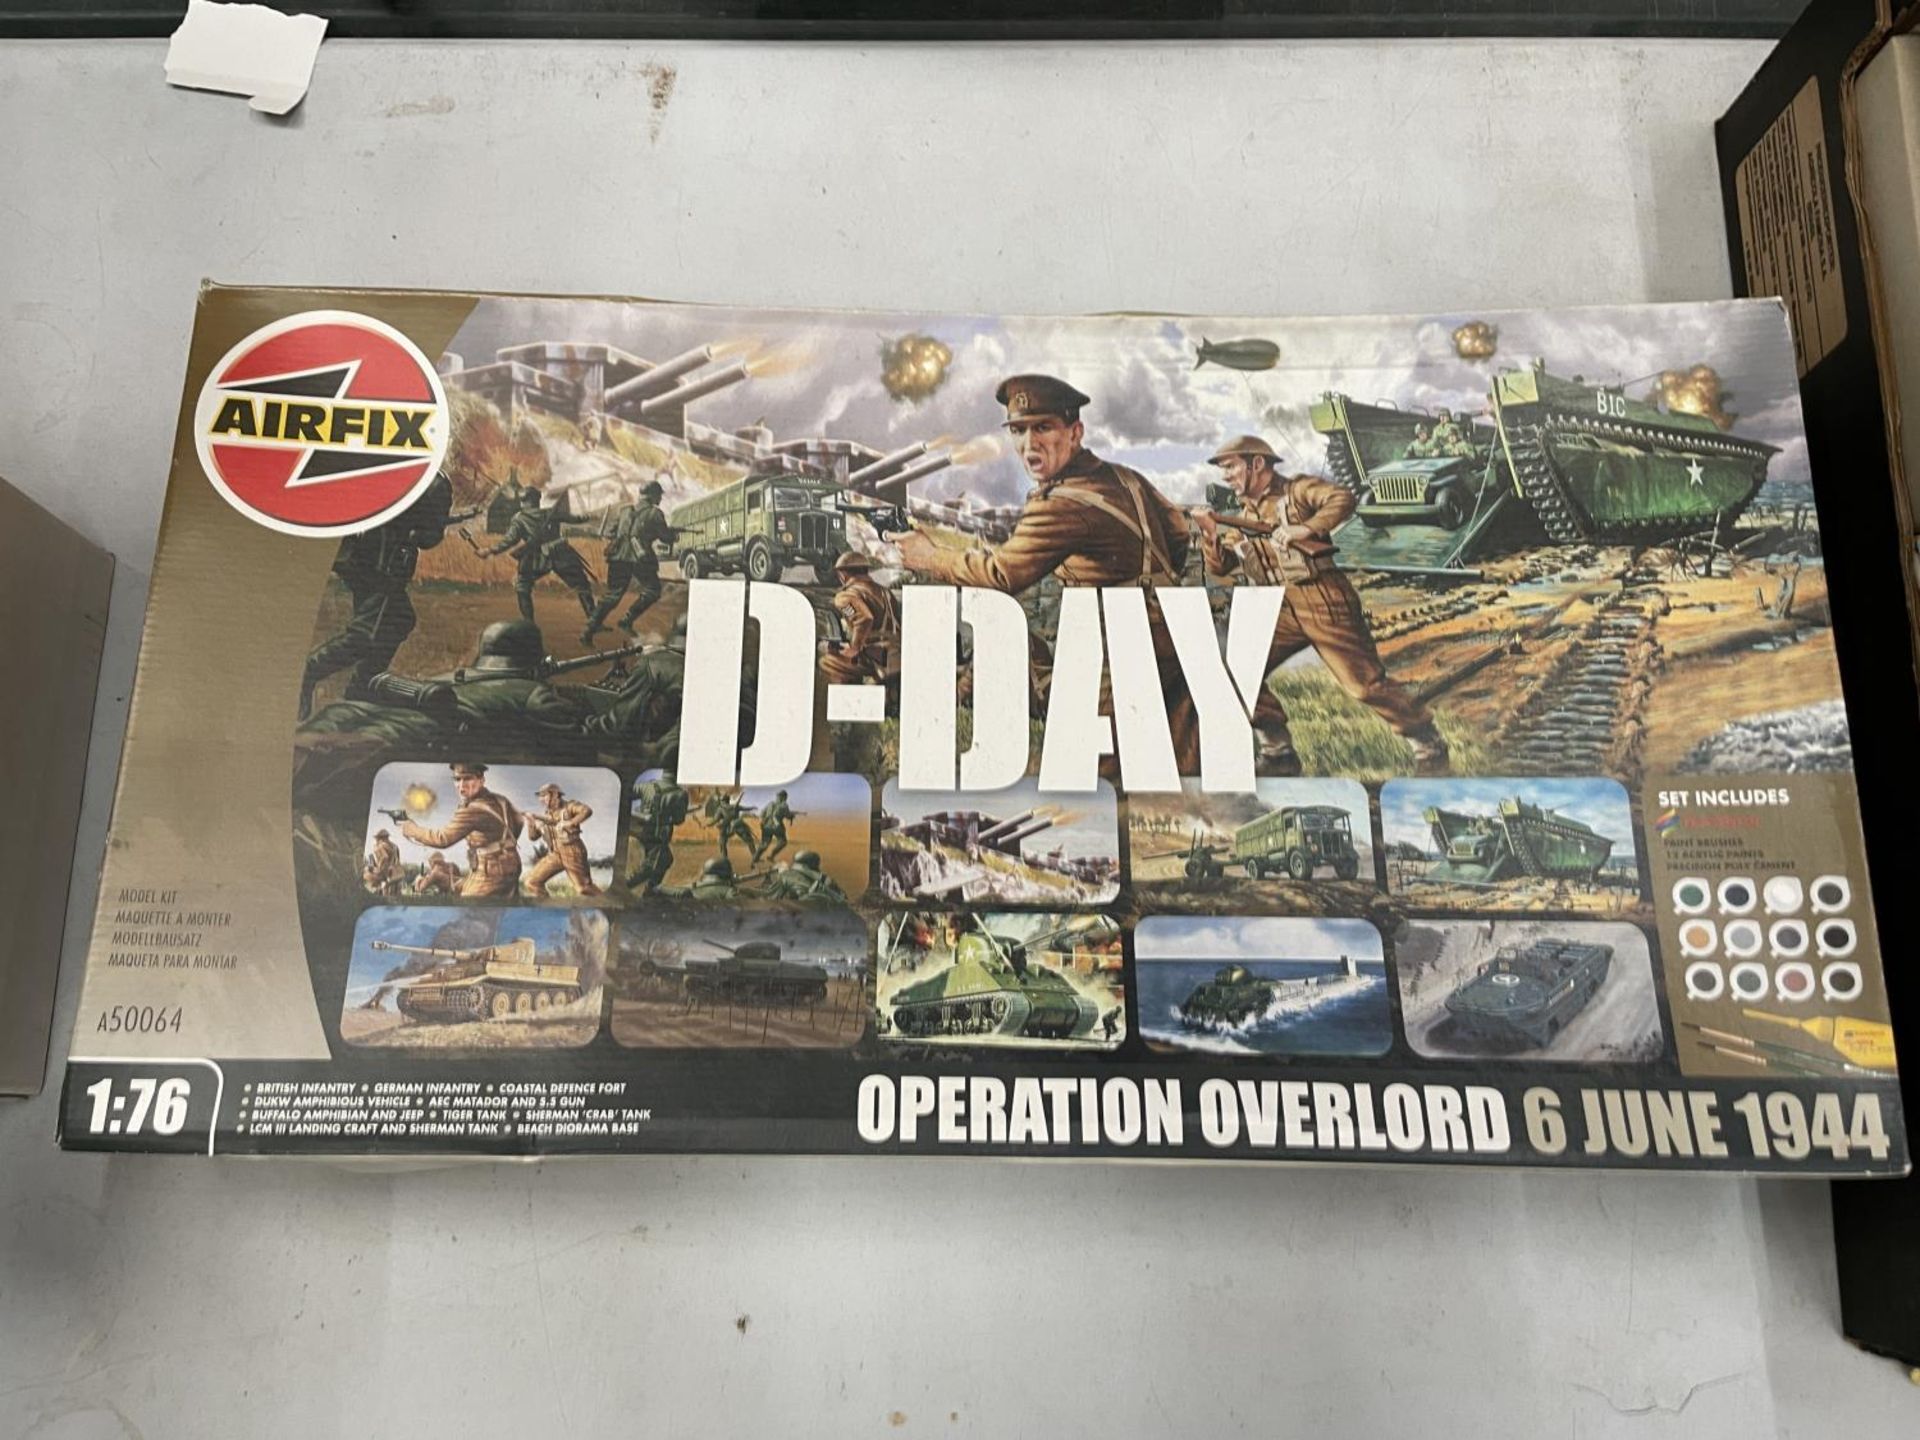 A BOXED AIRFIX D-DAY OPERATION OVERLORD 6 JUNE 1944 MODEL KIT 1:76 SCALE